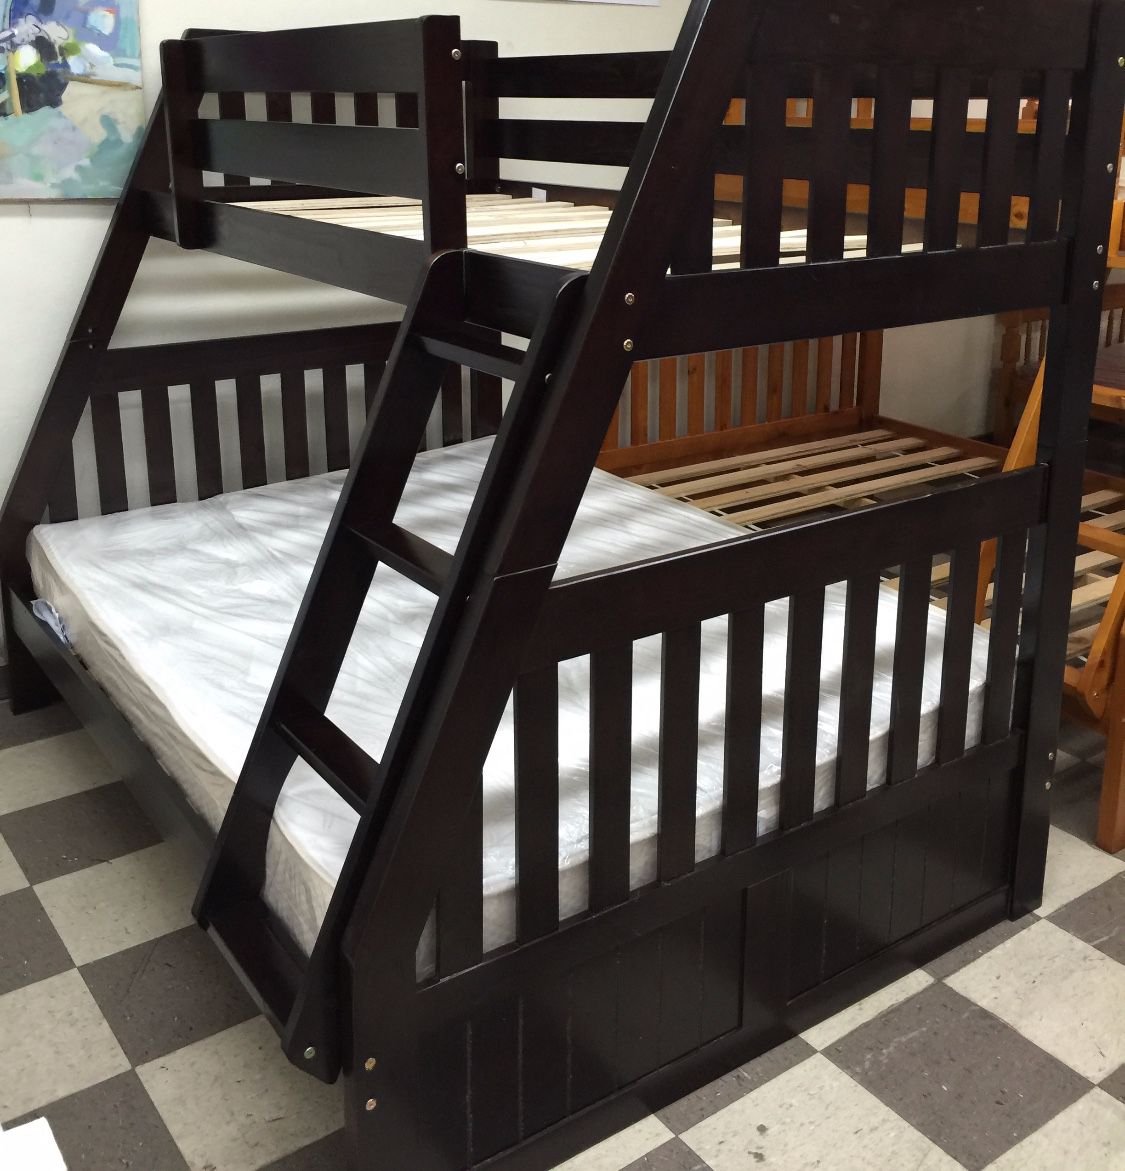 Brand new full twin wood bunk bed with mattress included